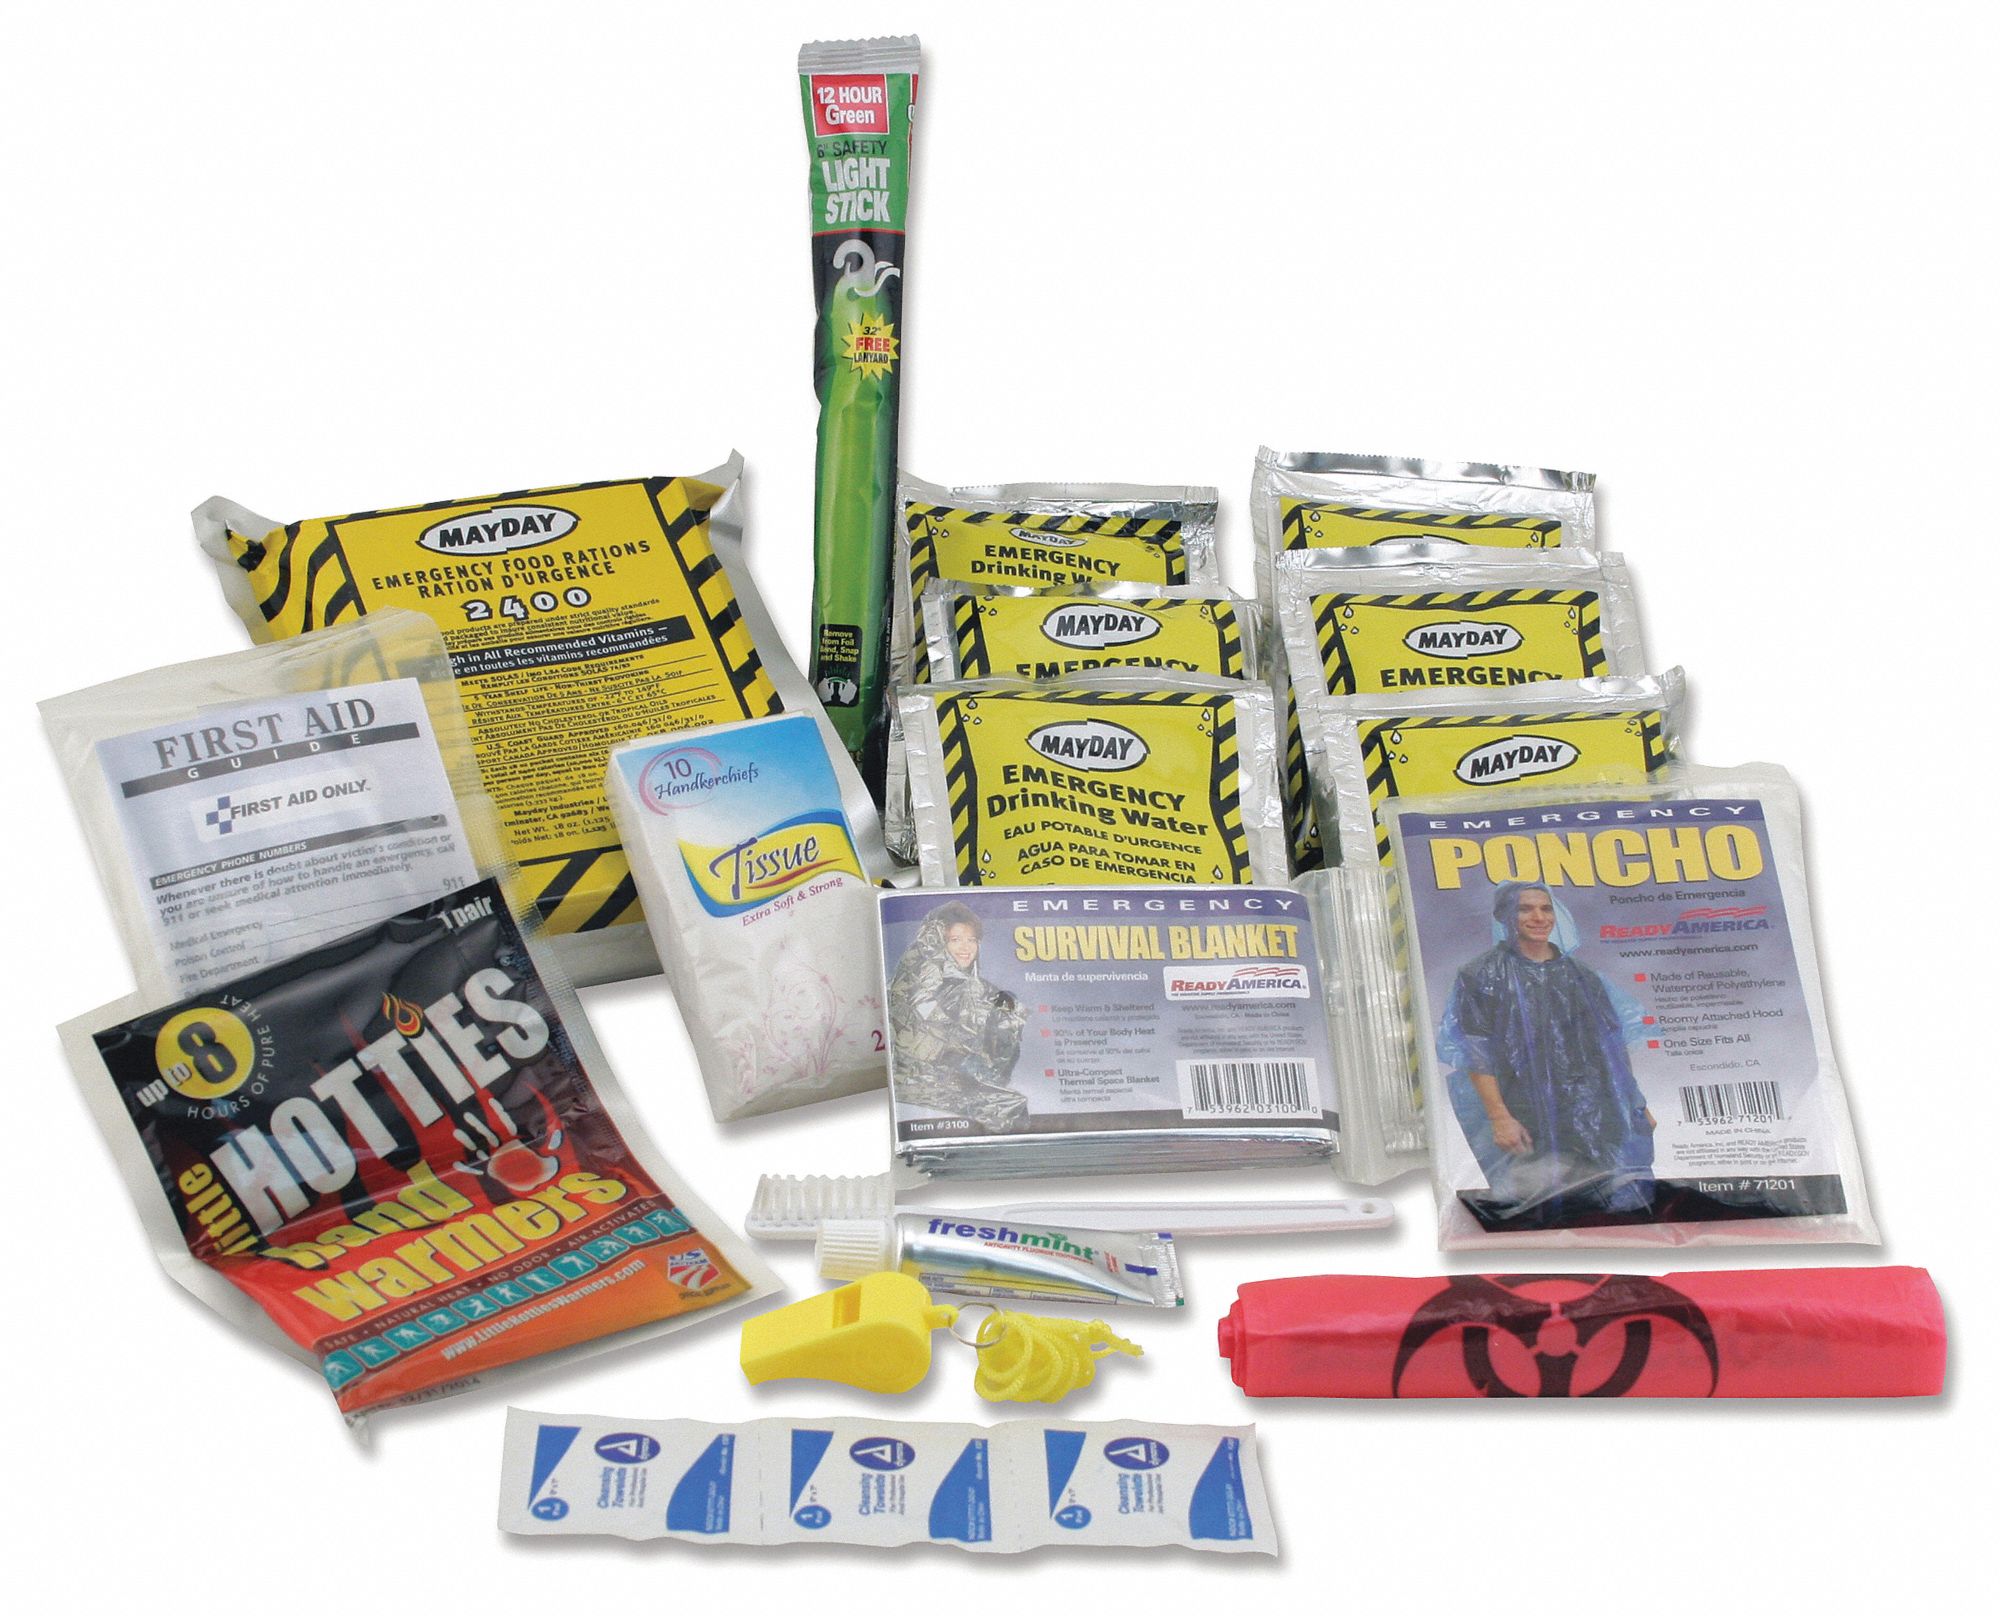 Personal Shelter Emergency Kit: 36 Components, 1, Clear, 10 in Ht, 6 in Wd, 3 in Lg